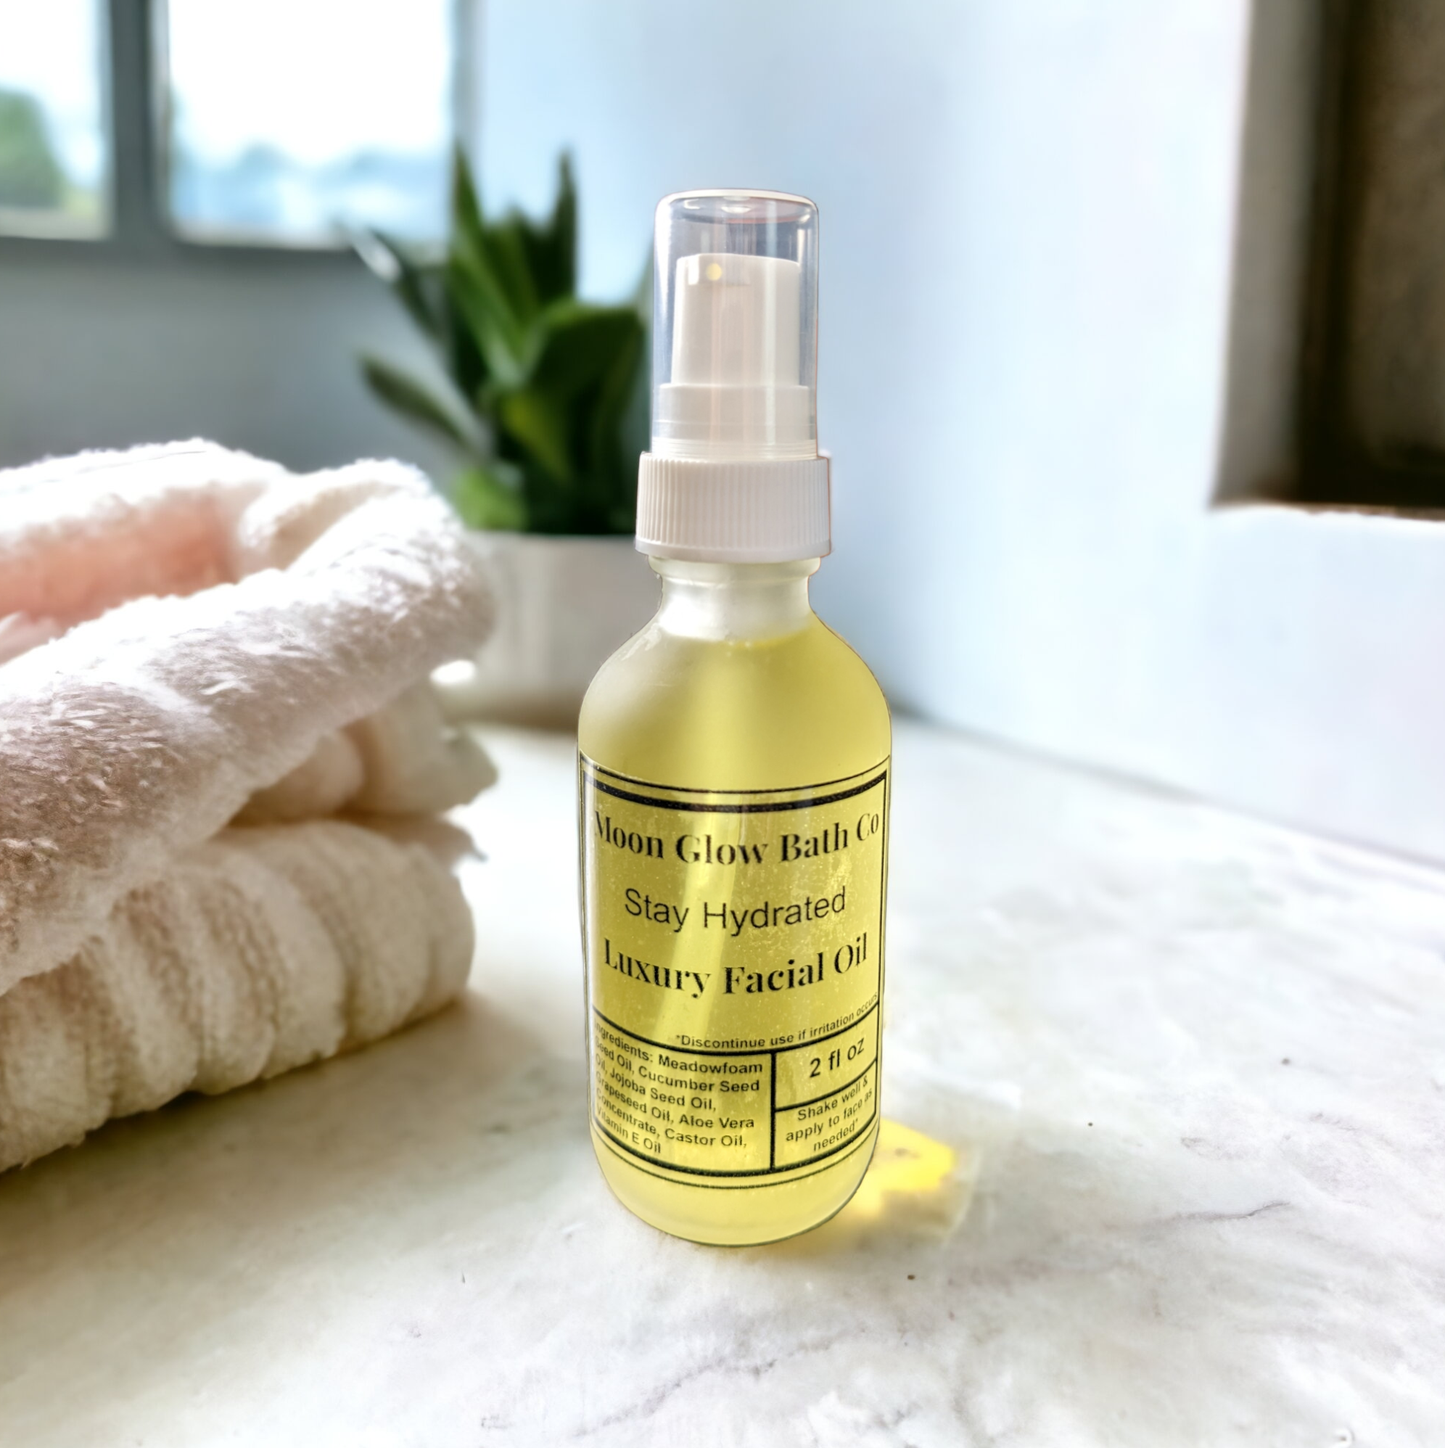 Stay Hydrated Luxury Facial Oil